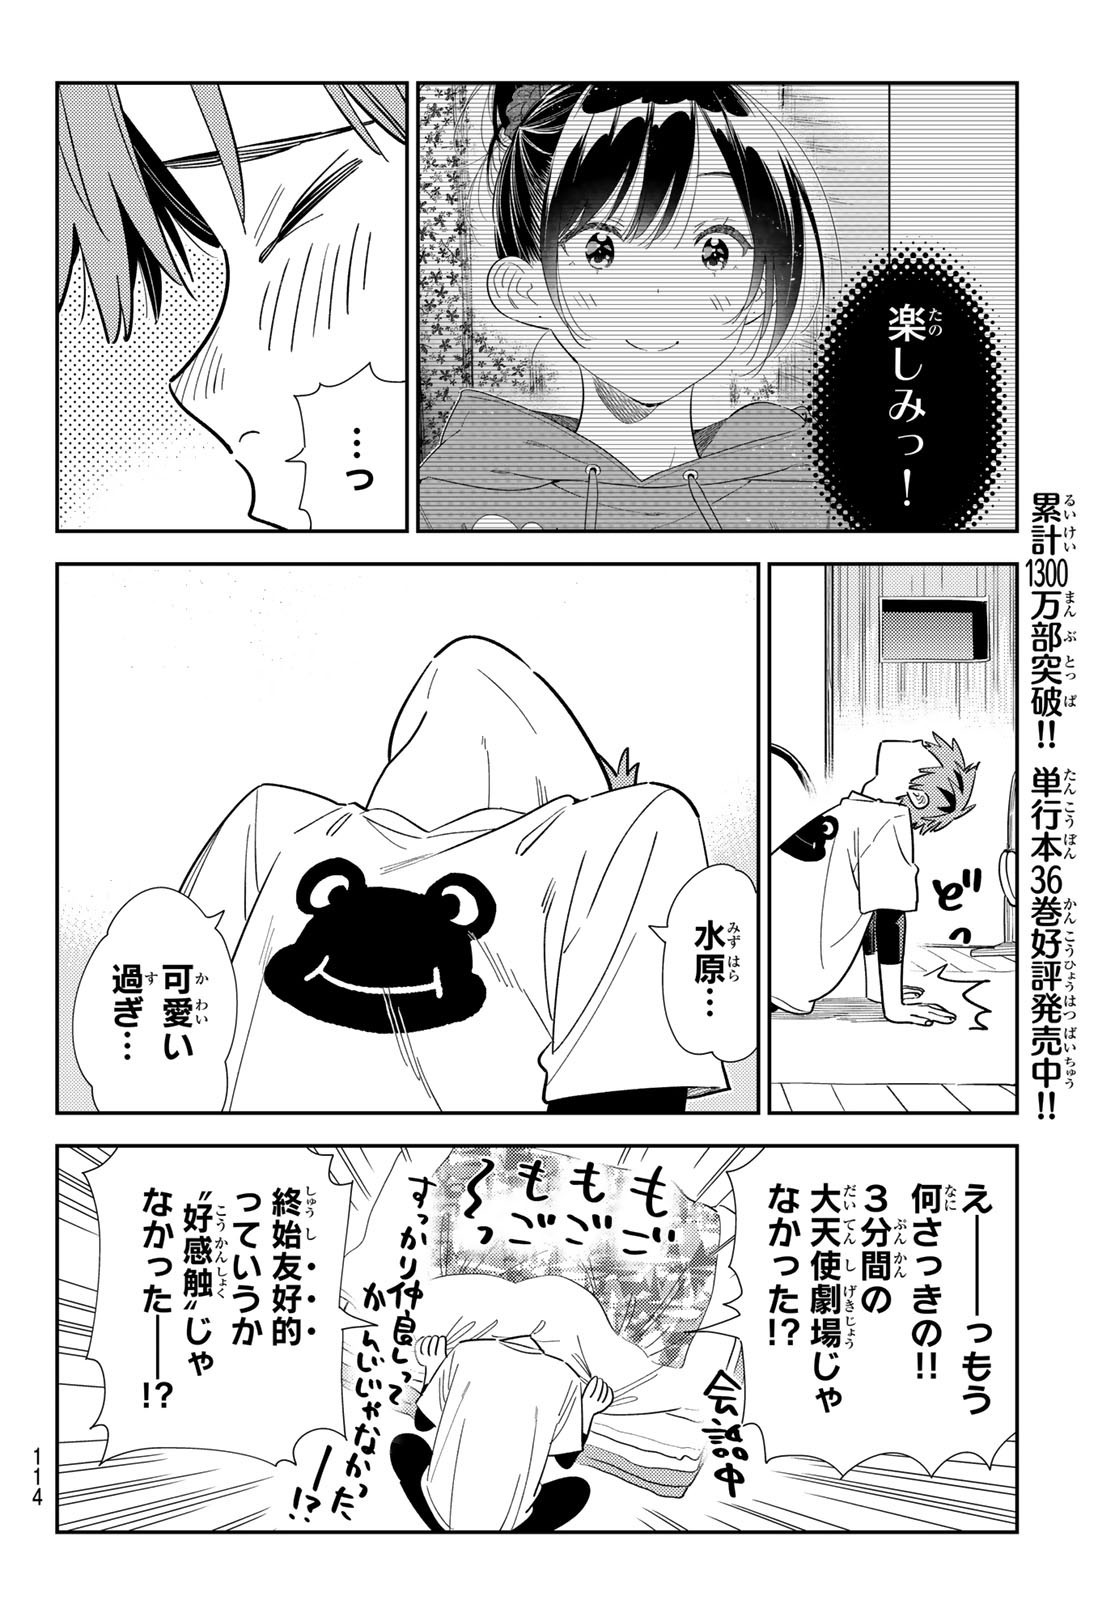 Weekly Shōnen Magazine - 週刊少年マガジン - Chapter 2024-23 - Page 112